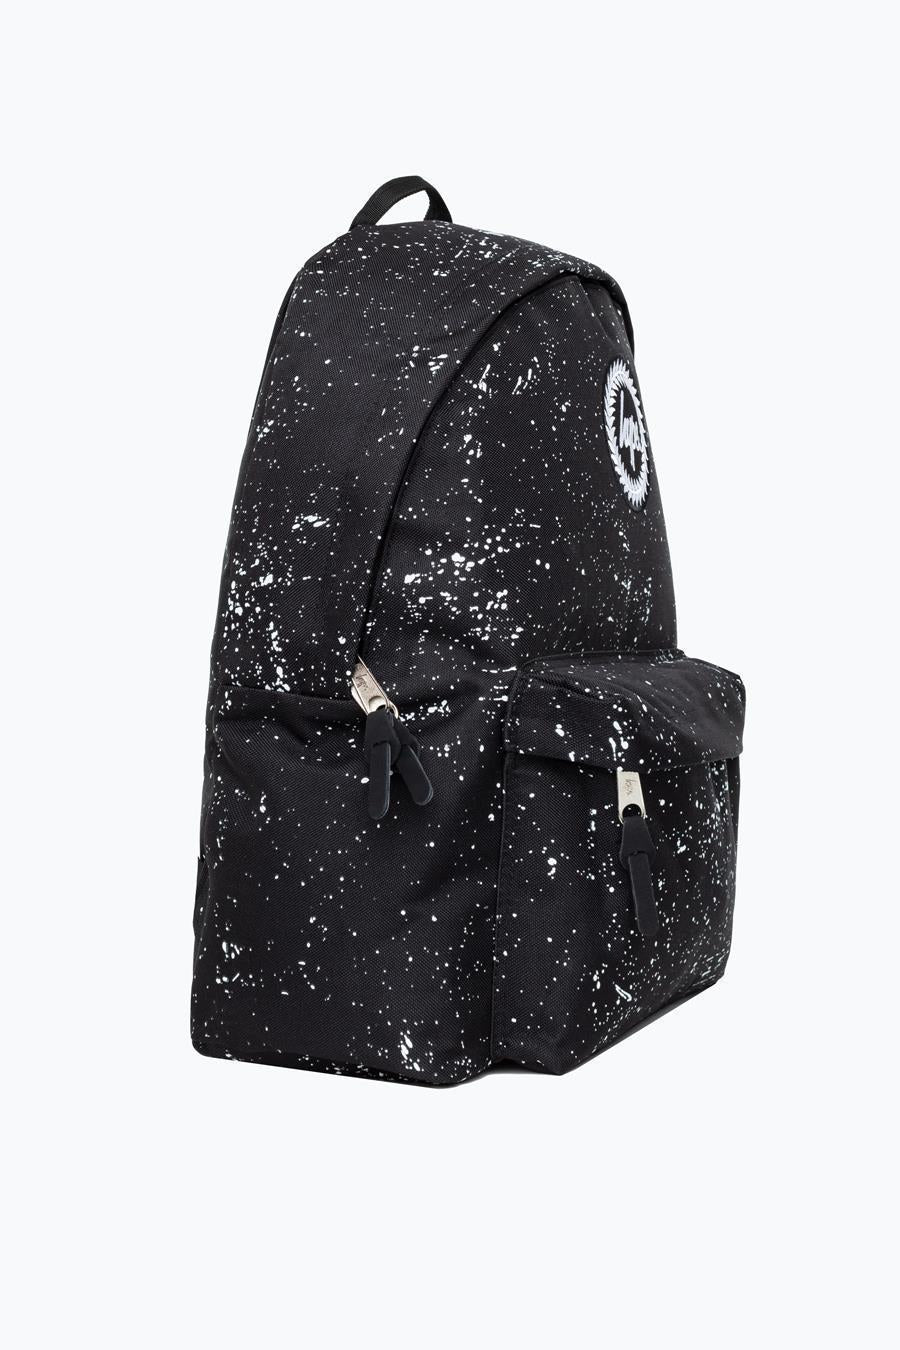 Hype Black With White Speckle Backpack